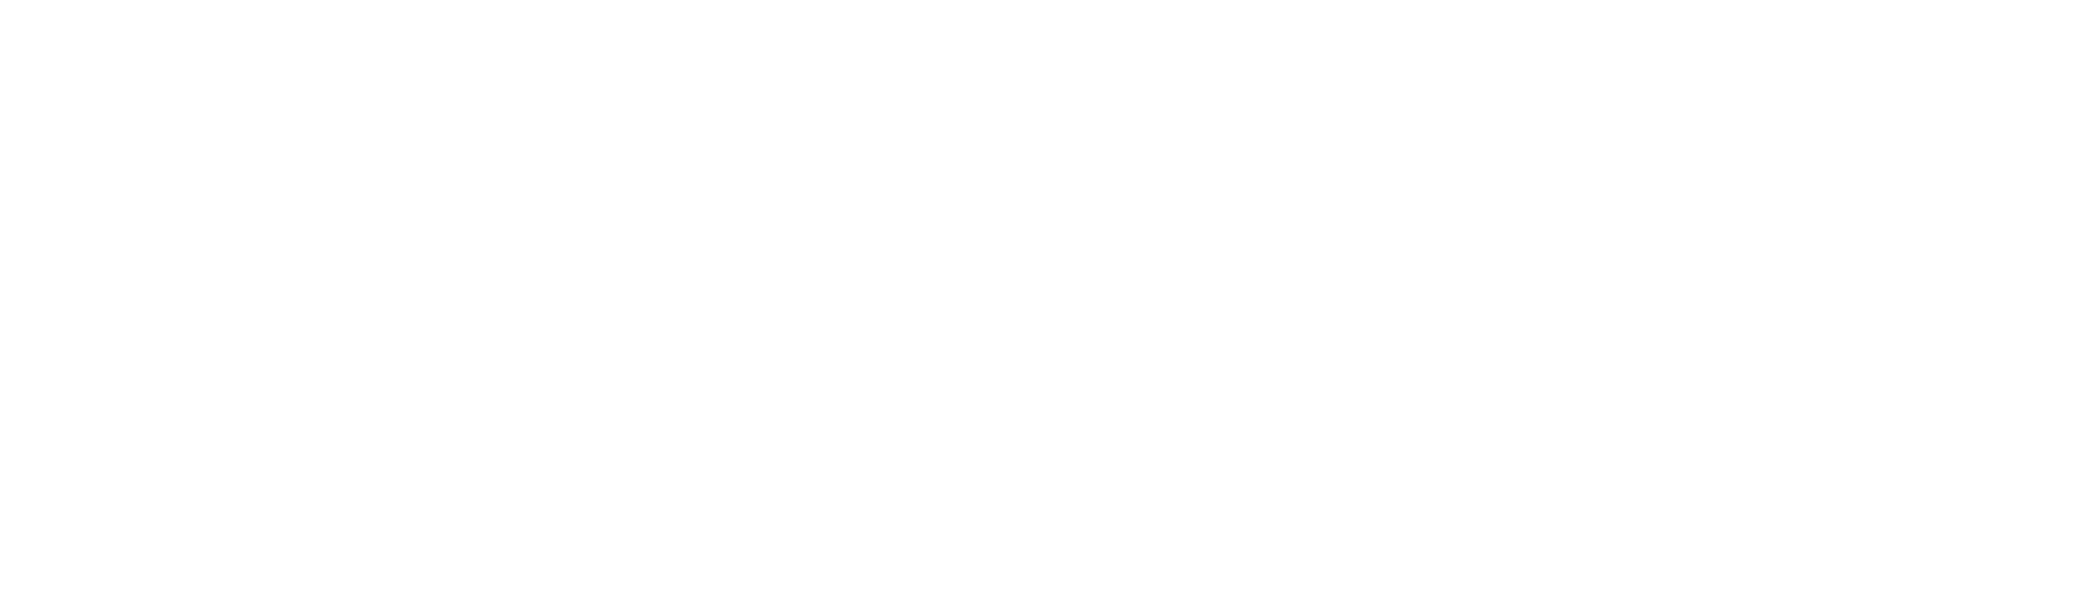 Yacht Charter Indonesia Private & Luxury Yacht Rental logo new